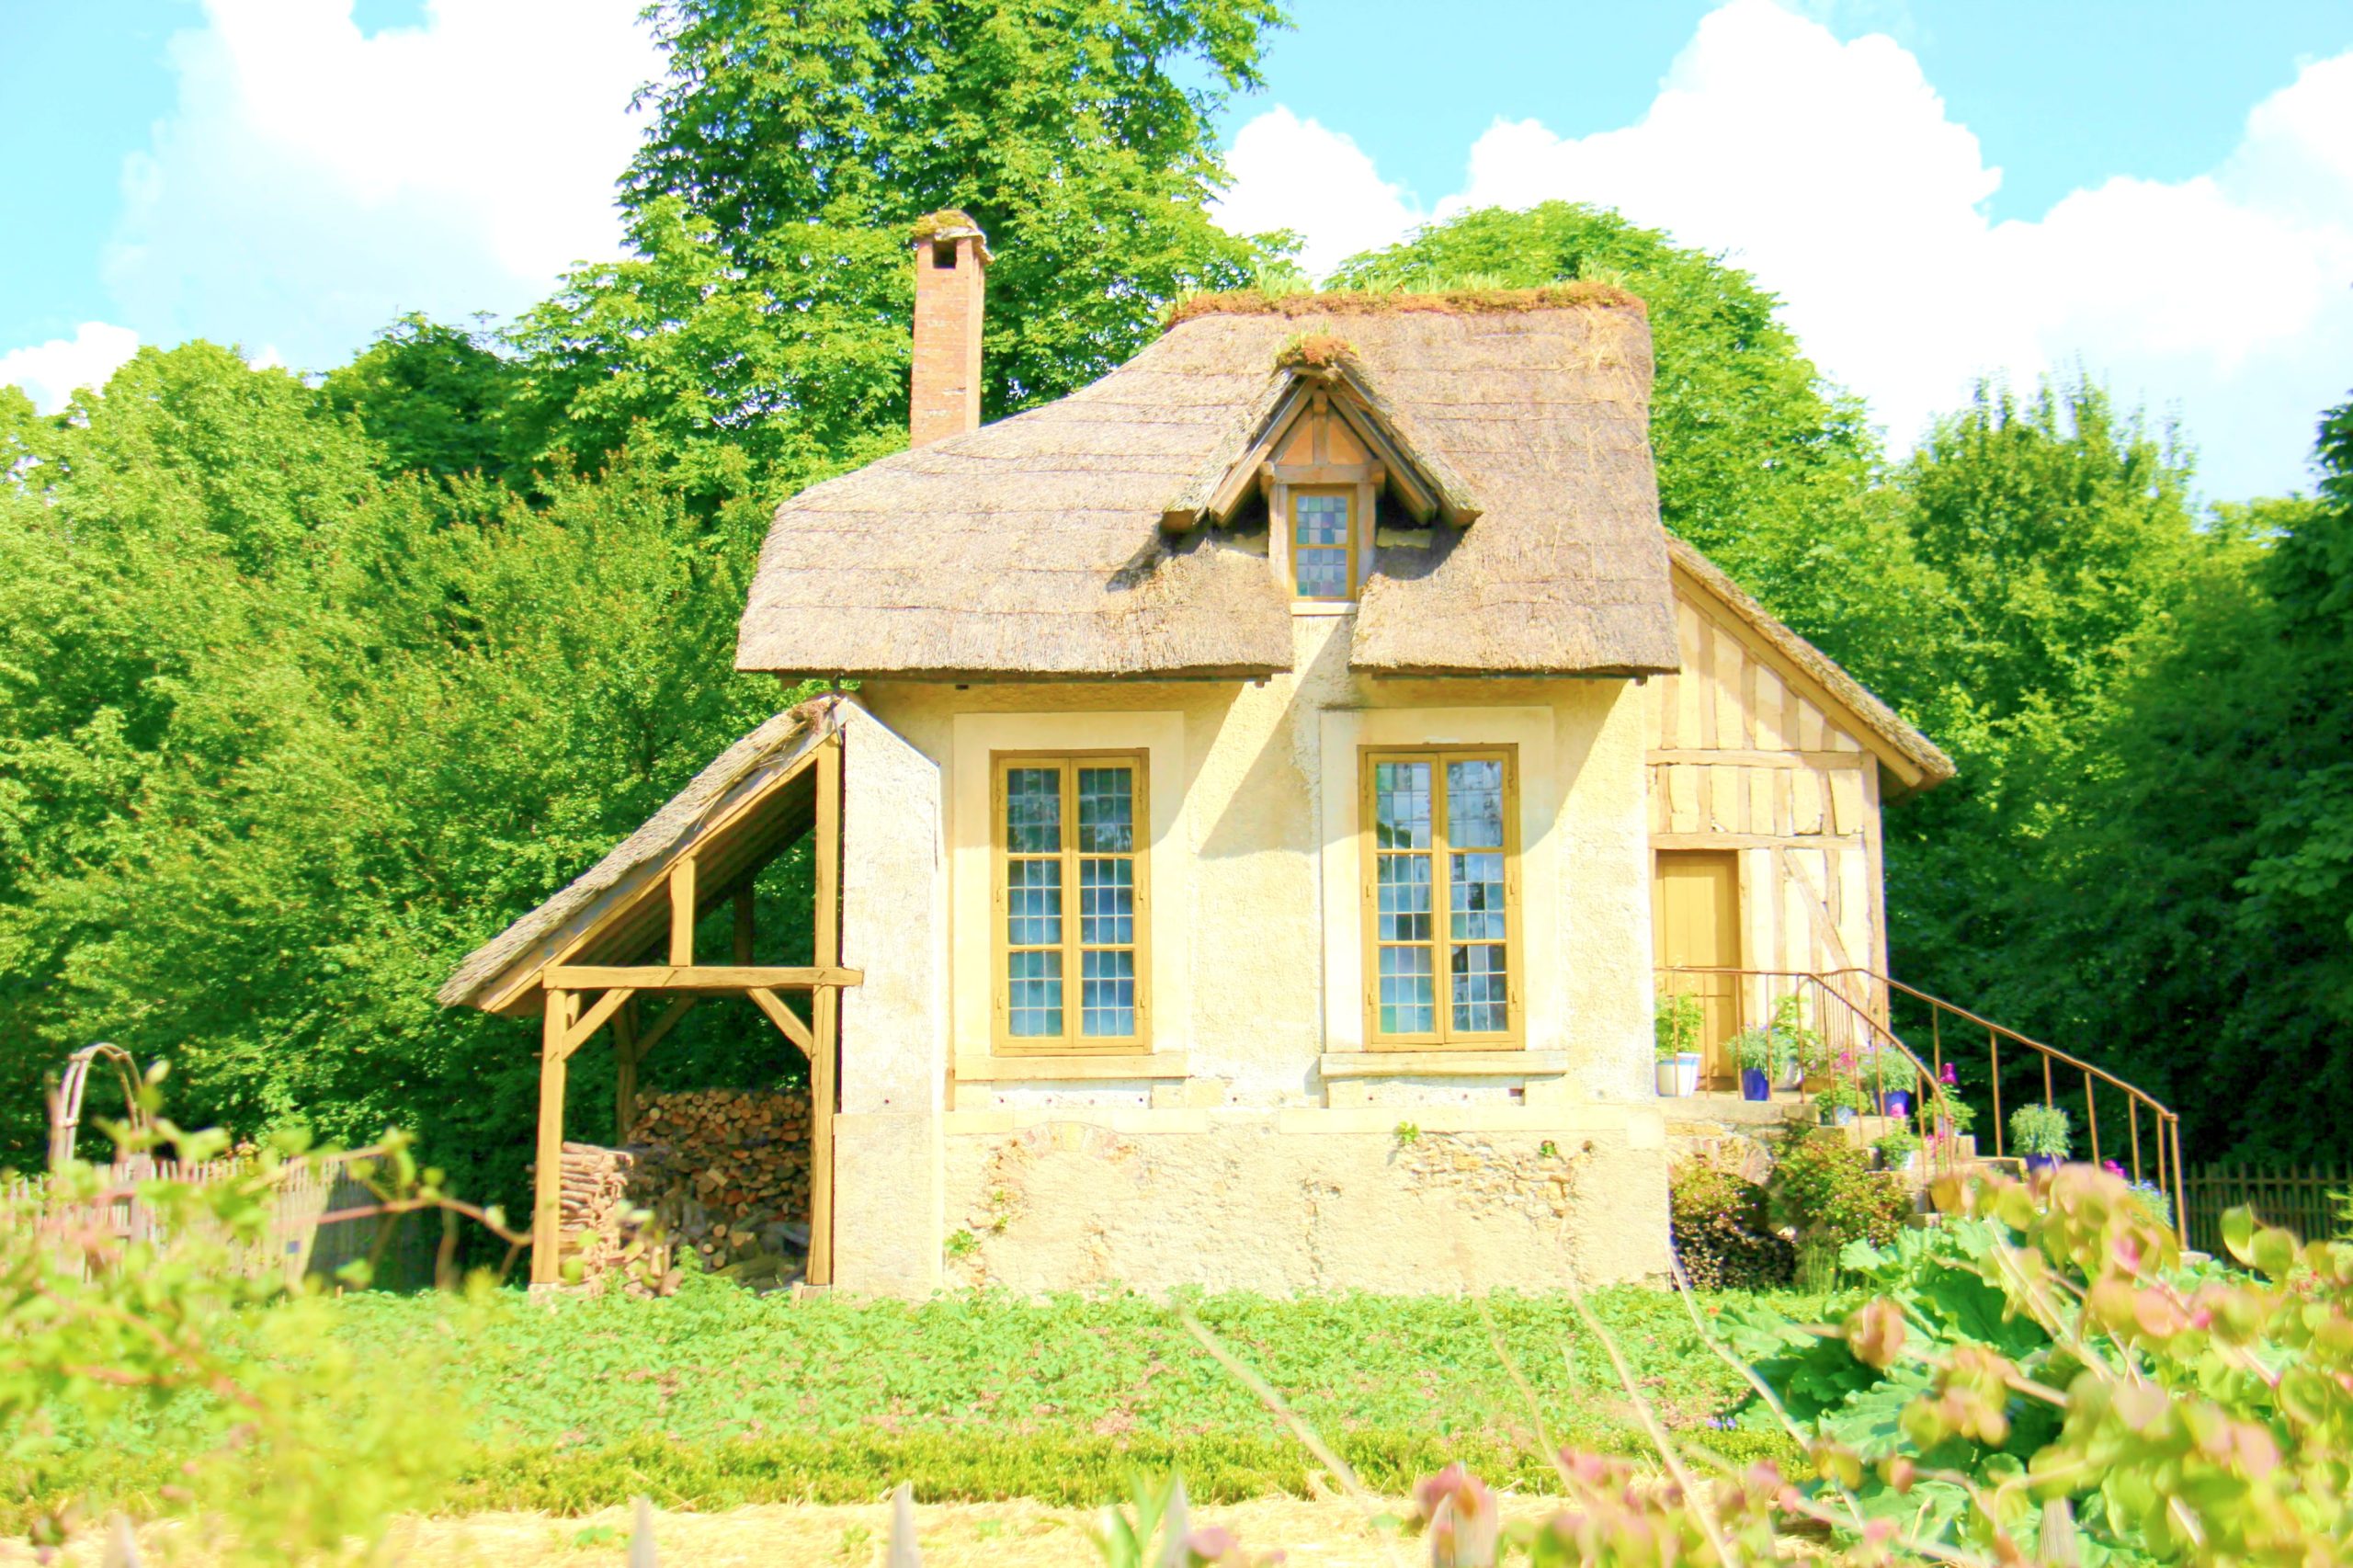 <img src="period cottage.jpg" alt="period cottage buying your first home"/> 